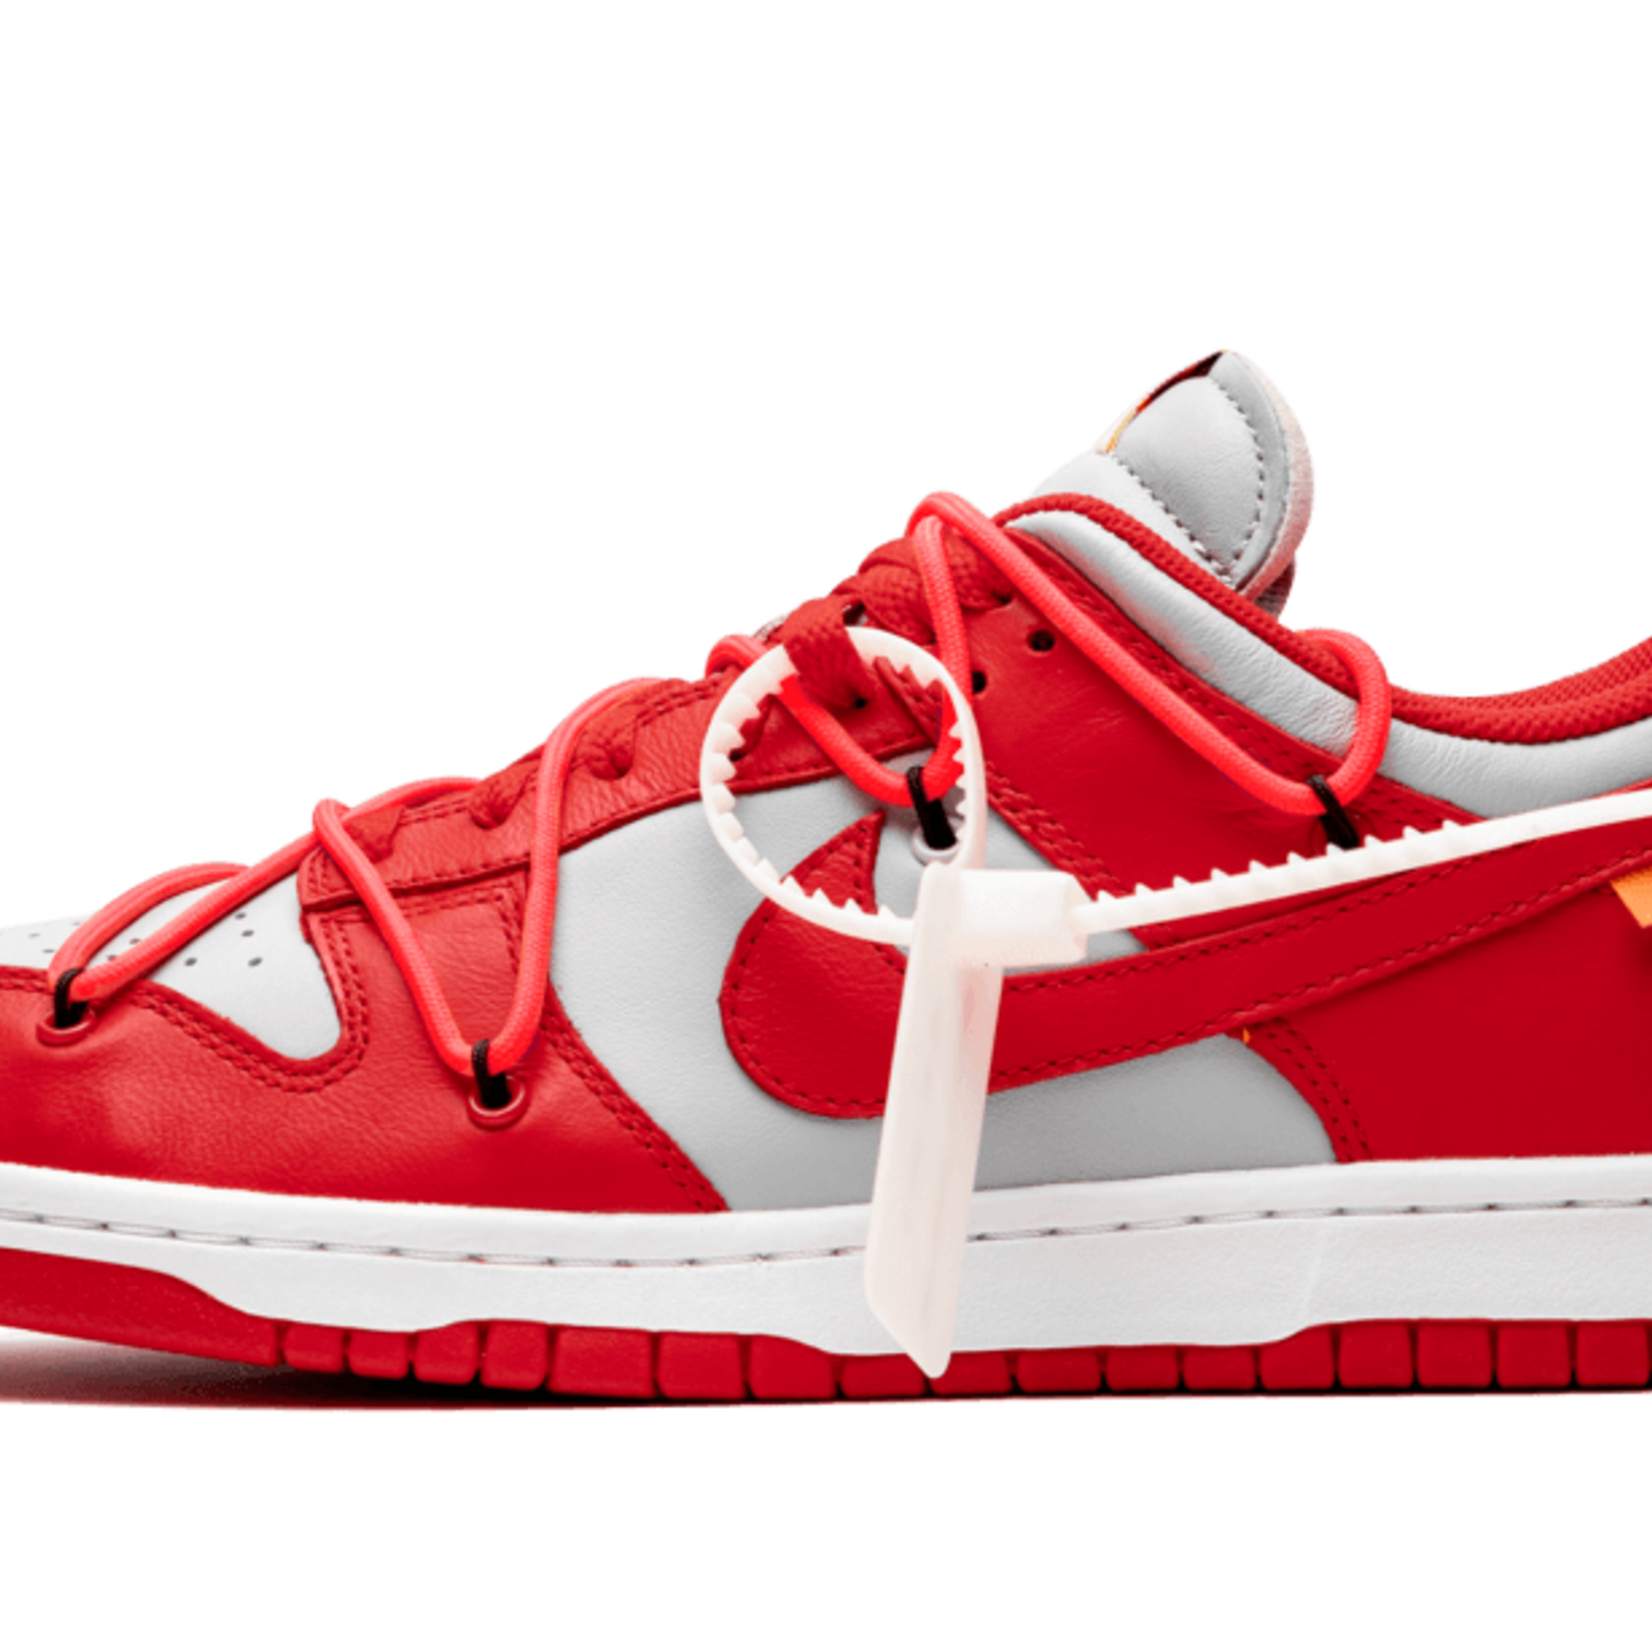 Nike Dunk Low  “Off-White - University Red”